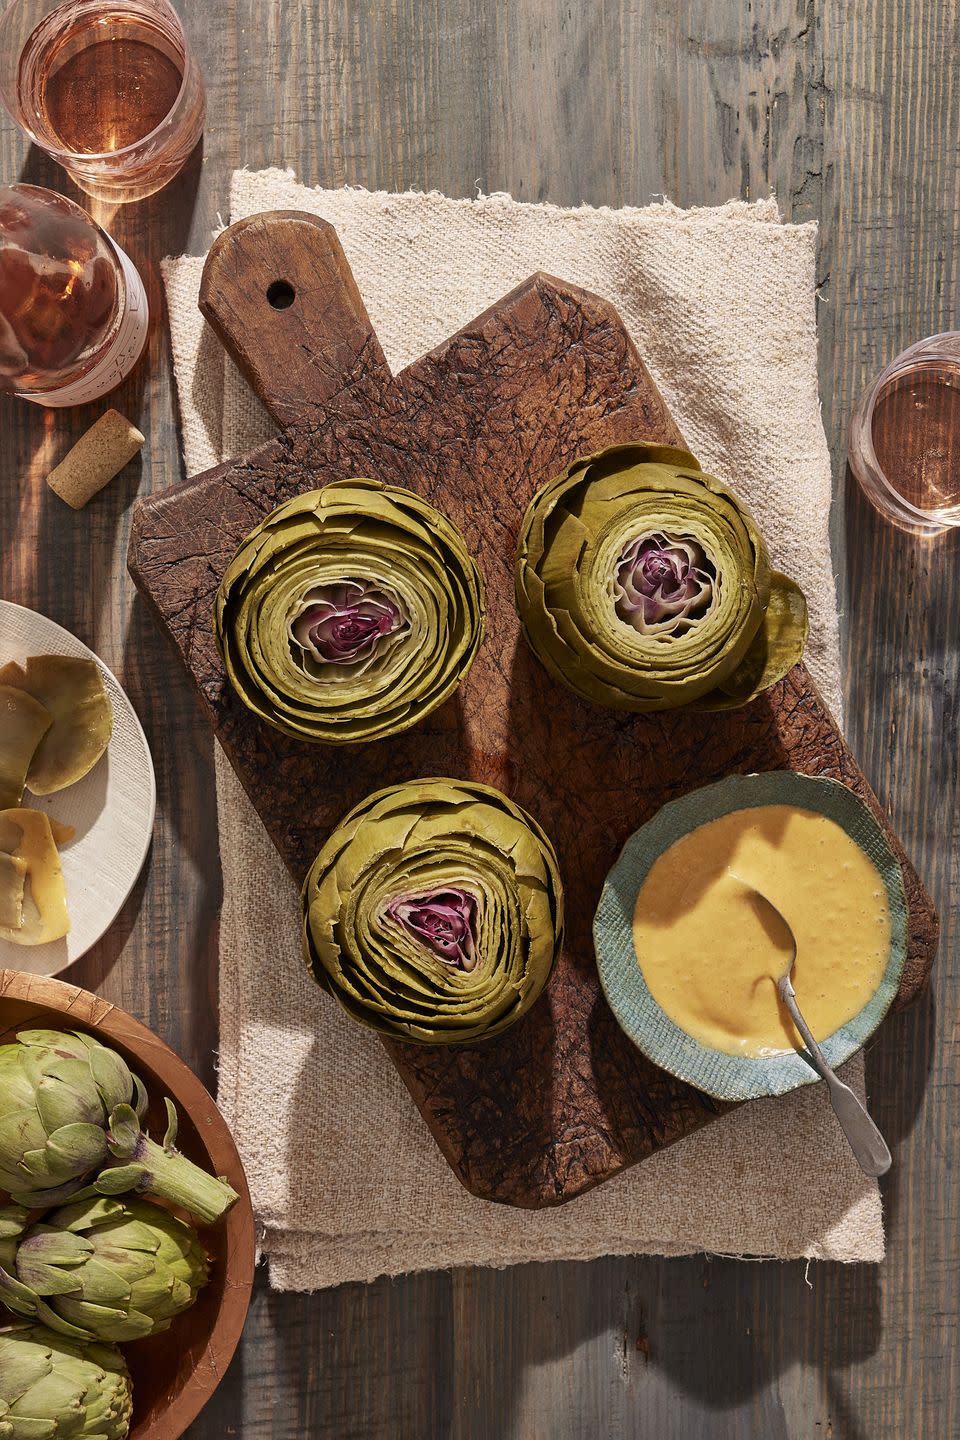 Steamed Artichokes with Smoked Paprika Aioli